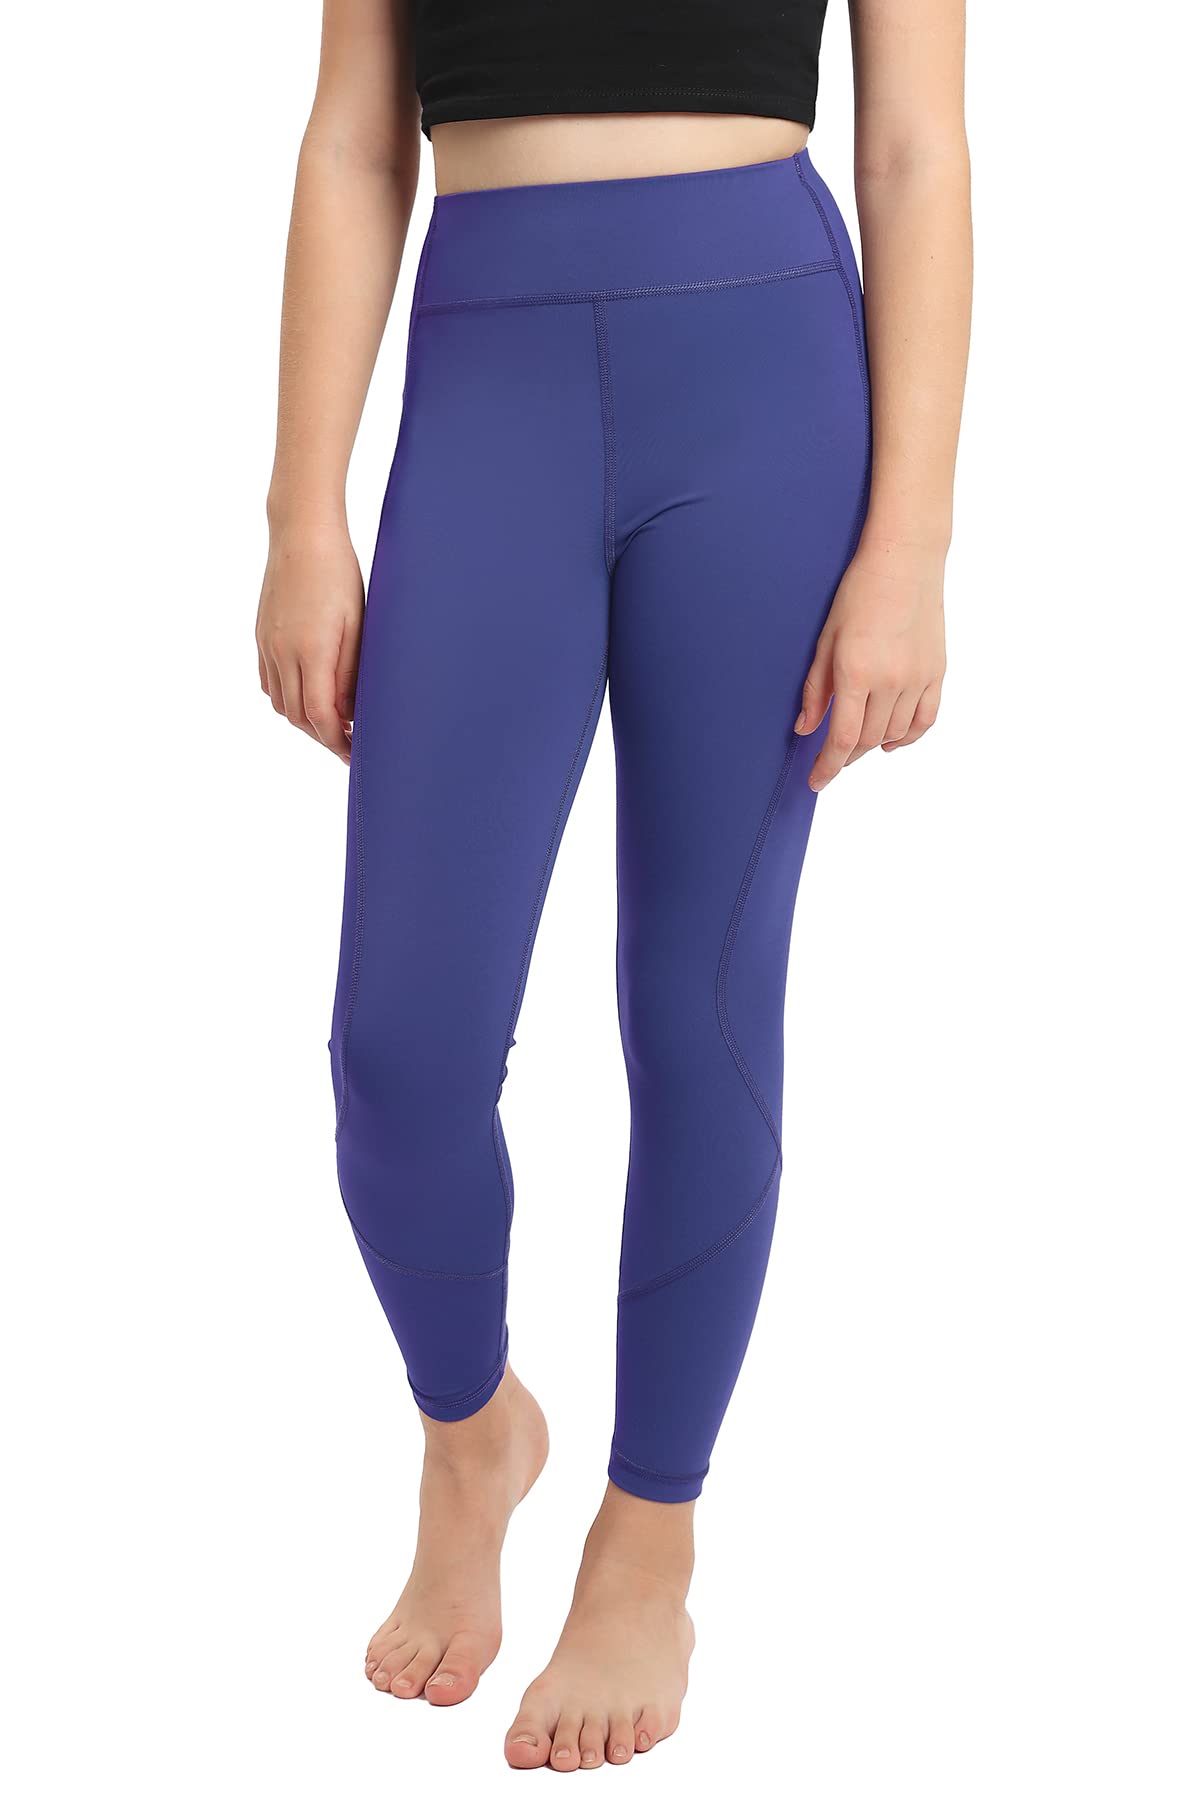 Purple Active Leggings, High Waisted Compression Tights, Body